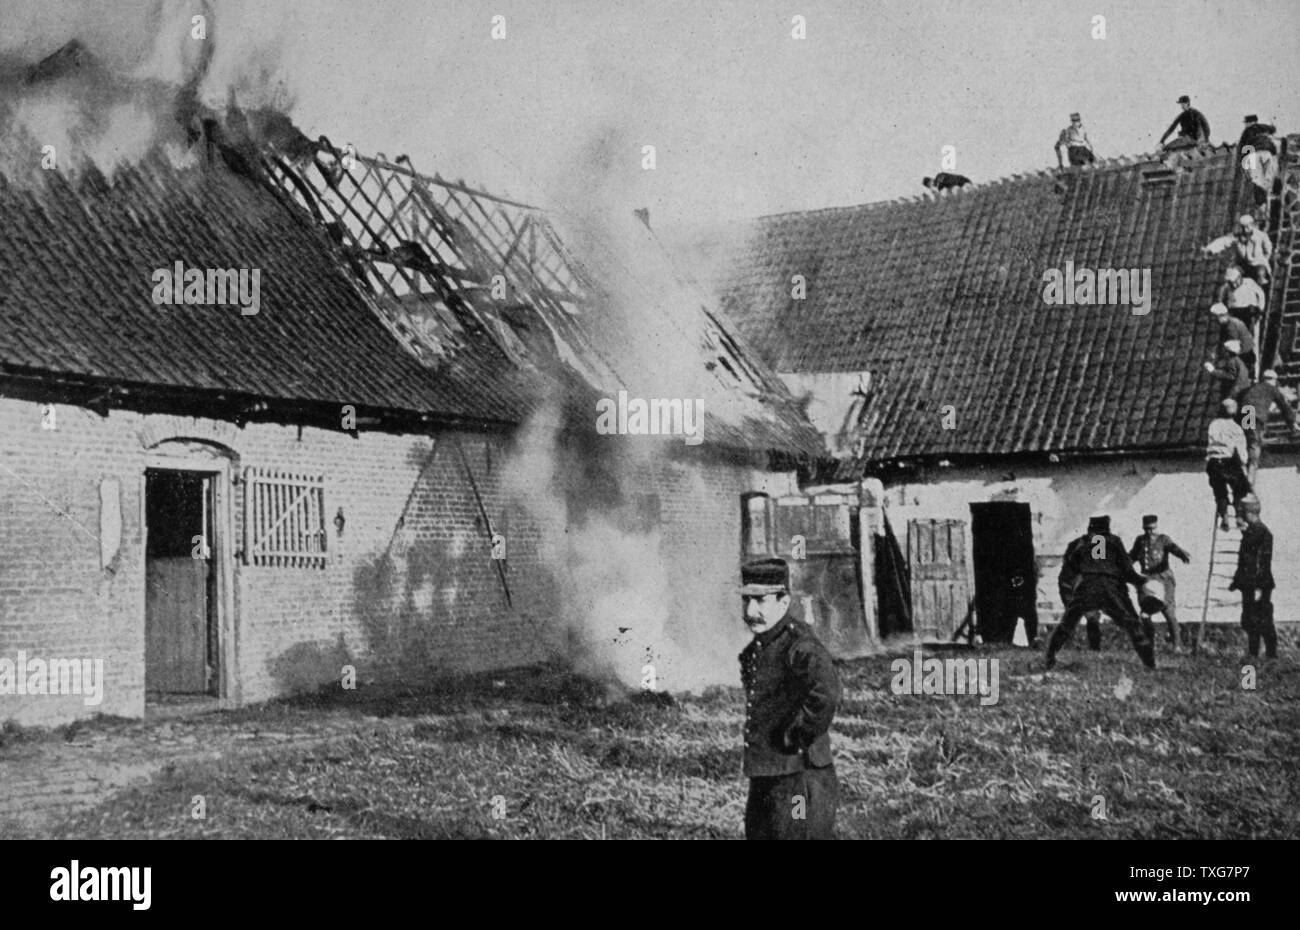 World War I  : Fighting a fire on a farm in Artois, France, set alight by German shellfire.  Being on the front line between German and Allied forces the area suffered severe damage.  From  'Le Flambeau', Paris, 18 September 1915. Stock Photo